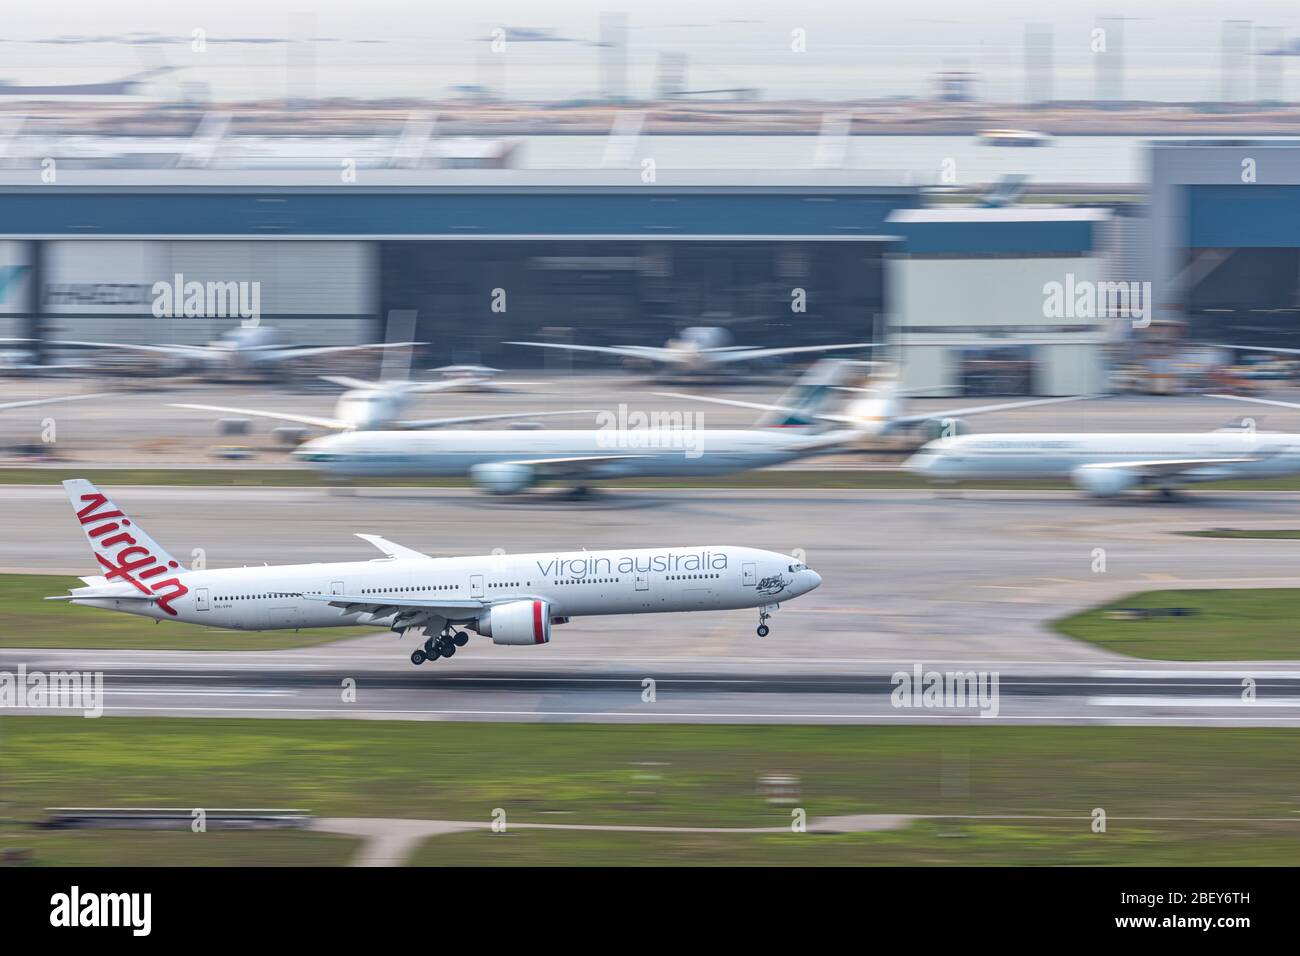 Lantau, Hong Kong  - April 10, 2020 :  Virgin Australia passenger airplane is landing in runway, all parking space is fully occupied because of COVID- Stock Photo